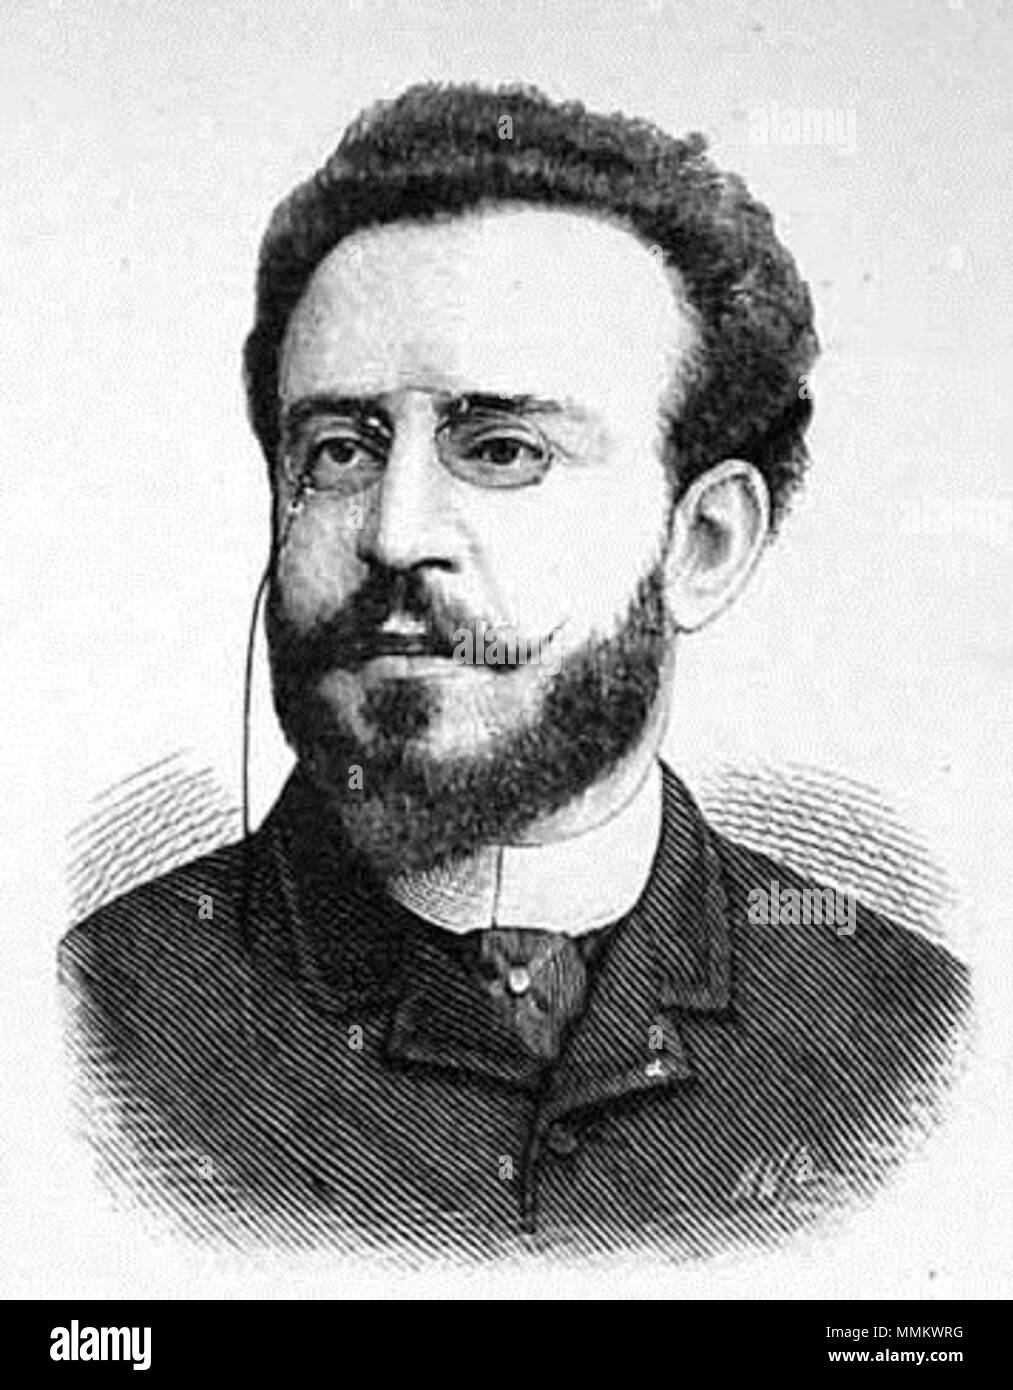 . English: Engraved portrait of the Portuguese opera singer, Francisco D'Andrade published in Illustrated Sporting and Dramatic News, 24 July 1886, Vol. 2, p. 540. This was the year he made his debut at the Royal Italian Opera in London.  . 24 July 1886. Uncredited in the text. Engraving has initials which appear to be 'A.W.'. Possibly the engraver August Weger (1823-1892). See http://digitalgallery.nypl.org/nypldigital/id?1100792 Francisco D'Andrade, Illustrated Sporting and Dramatic News, 1886 Stock Photo